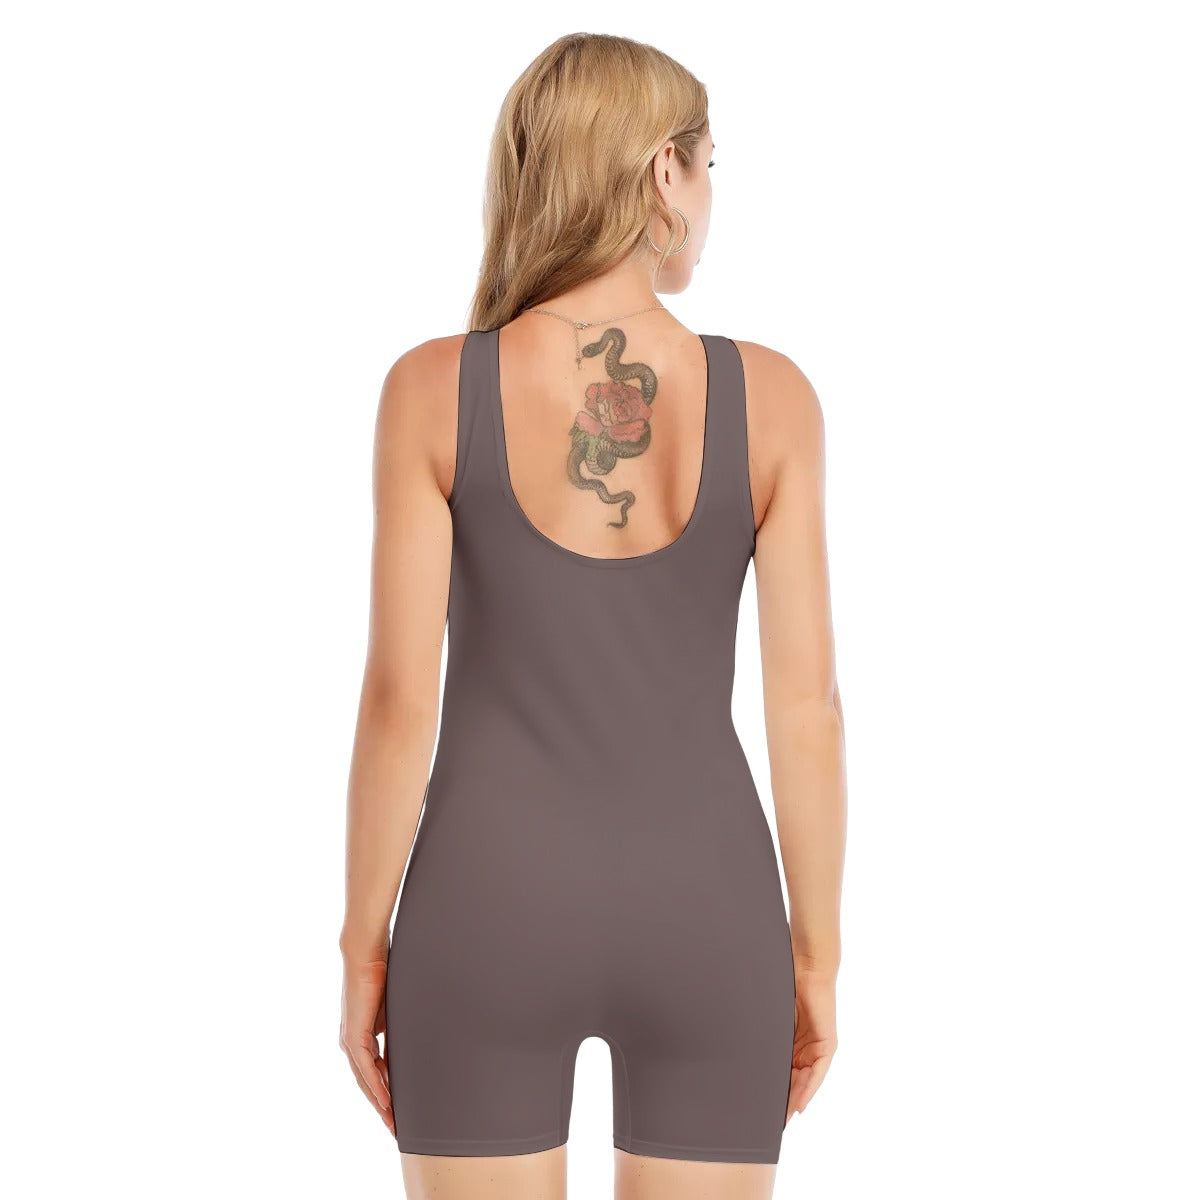 Aqua Yoga - Women's Sleeveless One-piece Swimsuit - Personal Hour for Yoga and Meditations 